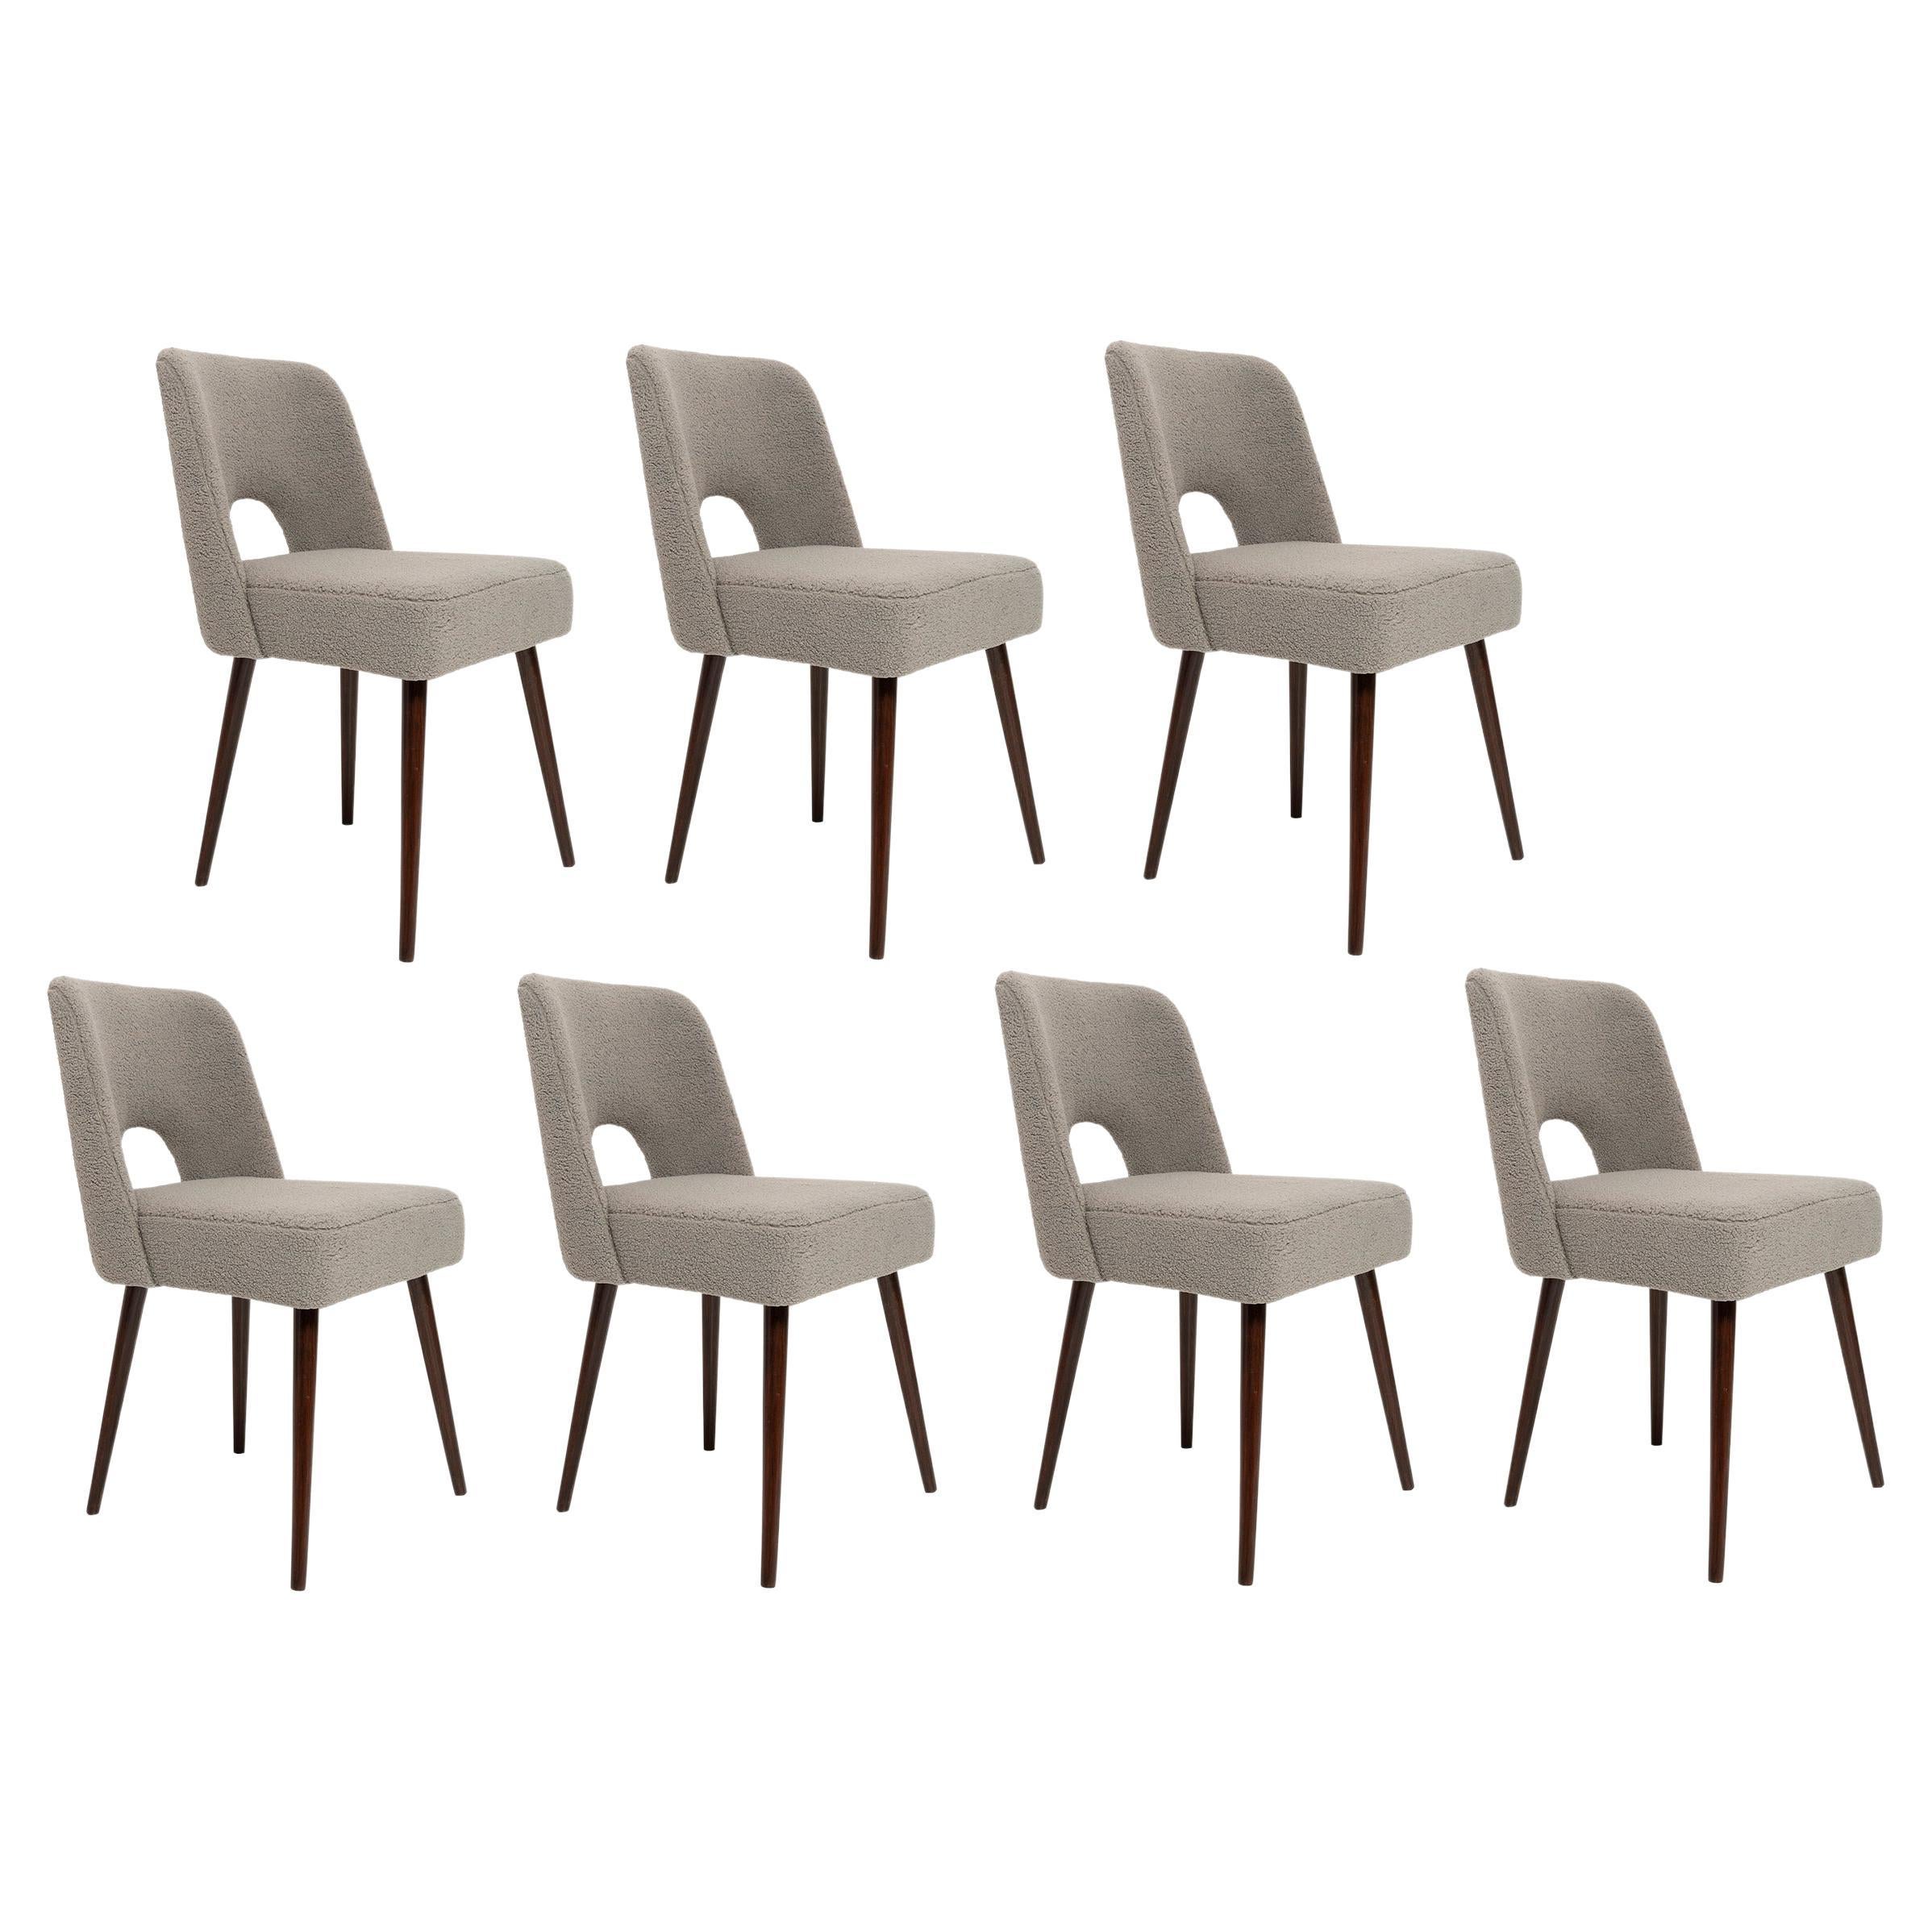 Set of Seven Gray Boucle 'Shell' Chairs, Dark Beech Wood, Europe, 1960s For Sale